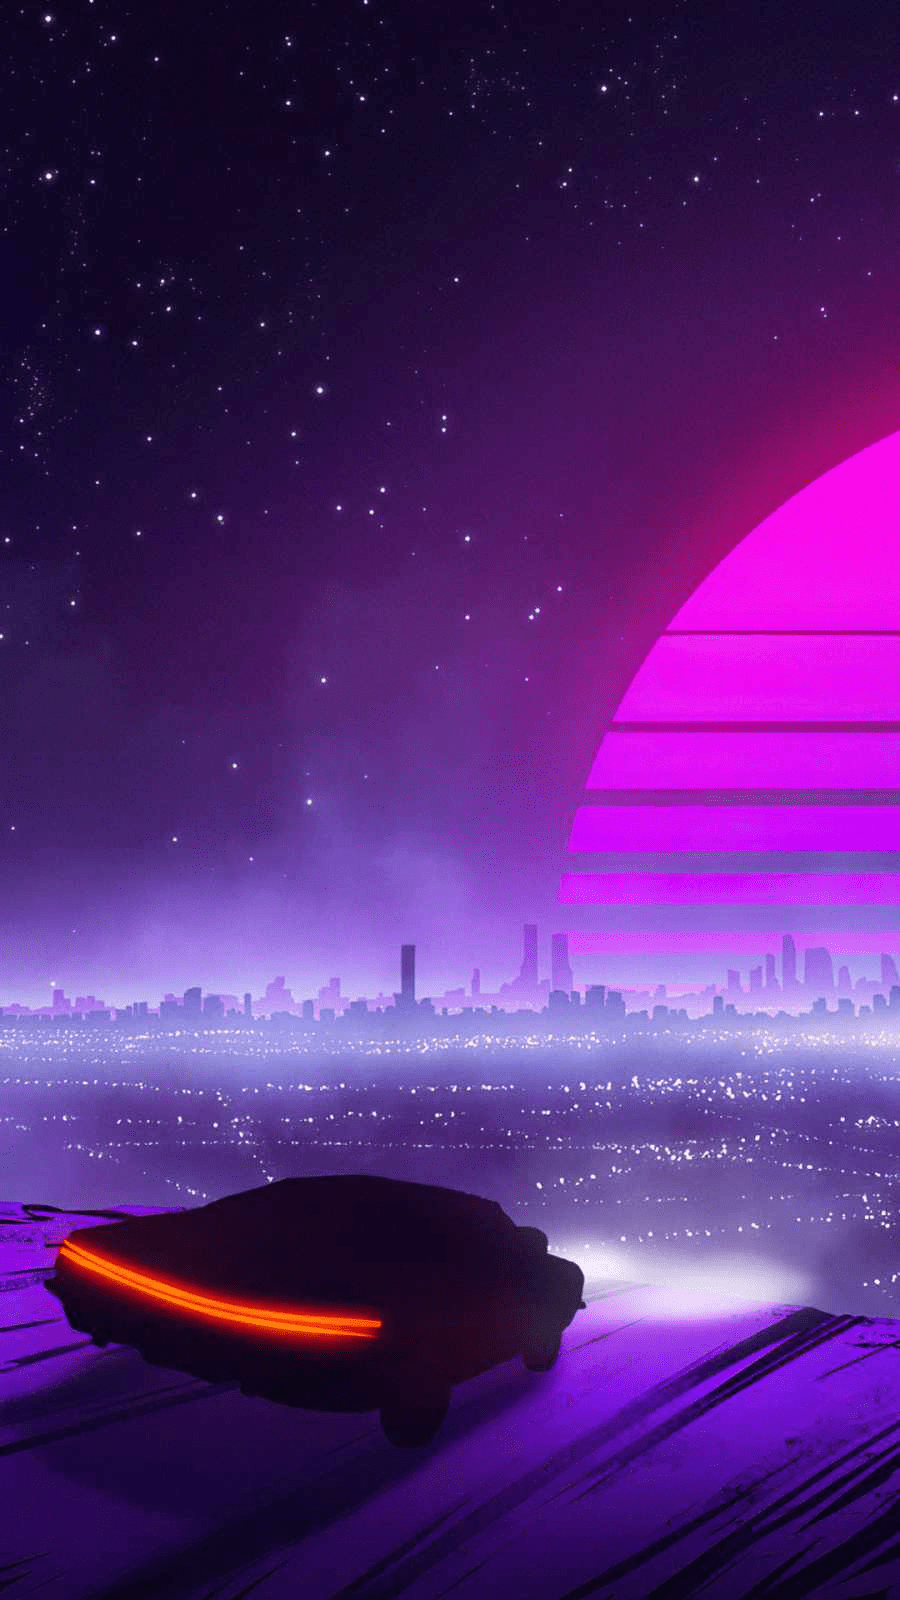 Aesthetic neon purple sunset over a cityscape with a car in the foreground - Synthwave